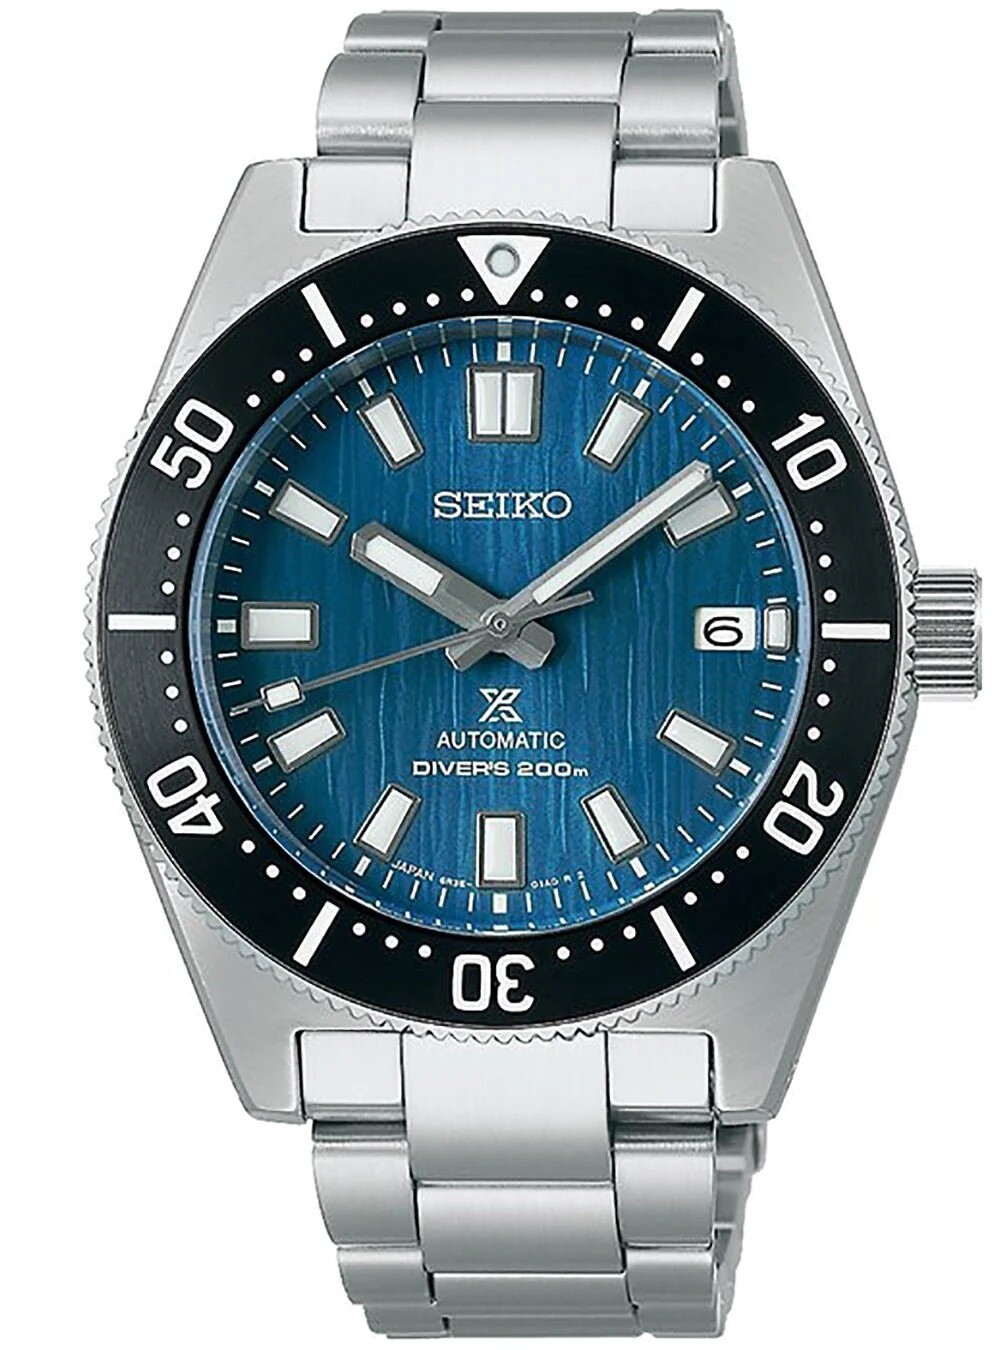 SEIKO PROSPEX SBDC165 JDM SAVE THE OCEAN SPECIAL EDITION 40.5mm 200m WR sapphire crystal sapphire crystal JDM steel strap (Japan domestic market)